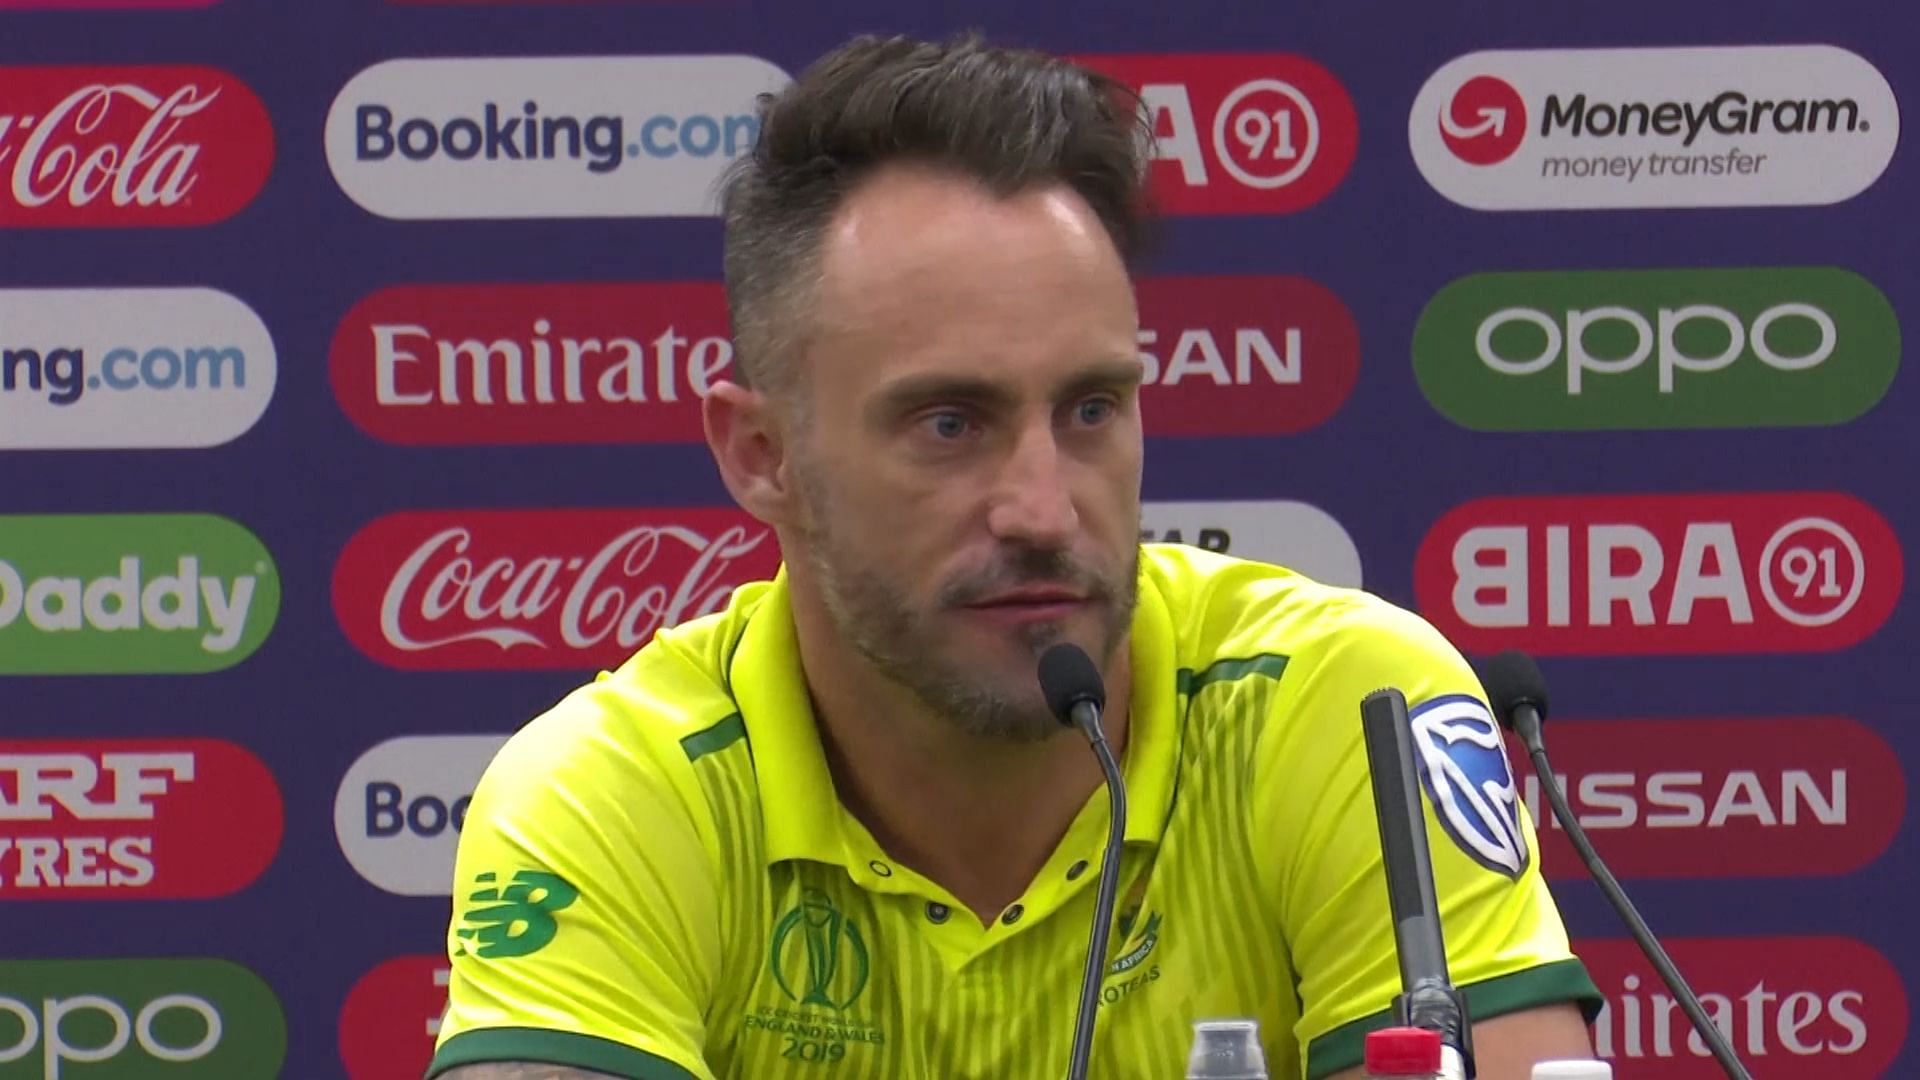 Reflecting on the overall performance, Faf du Plessis stated that things didn’t go according to their plan